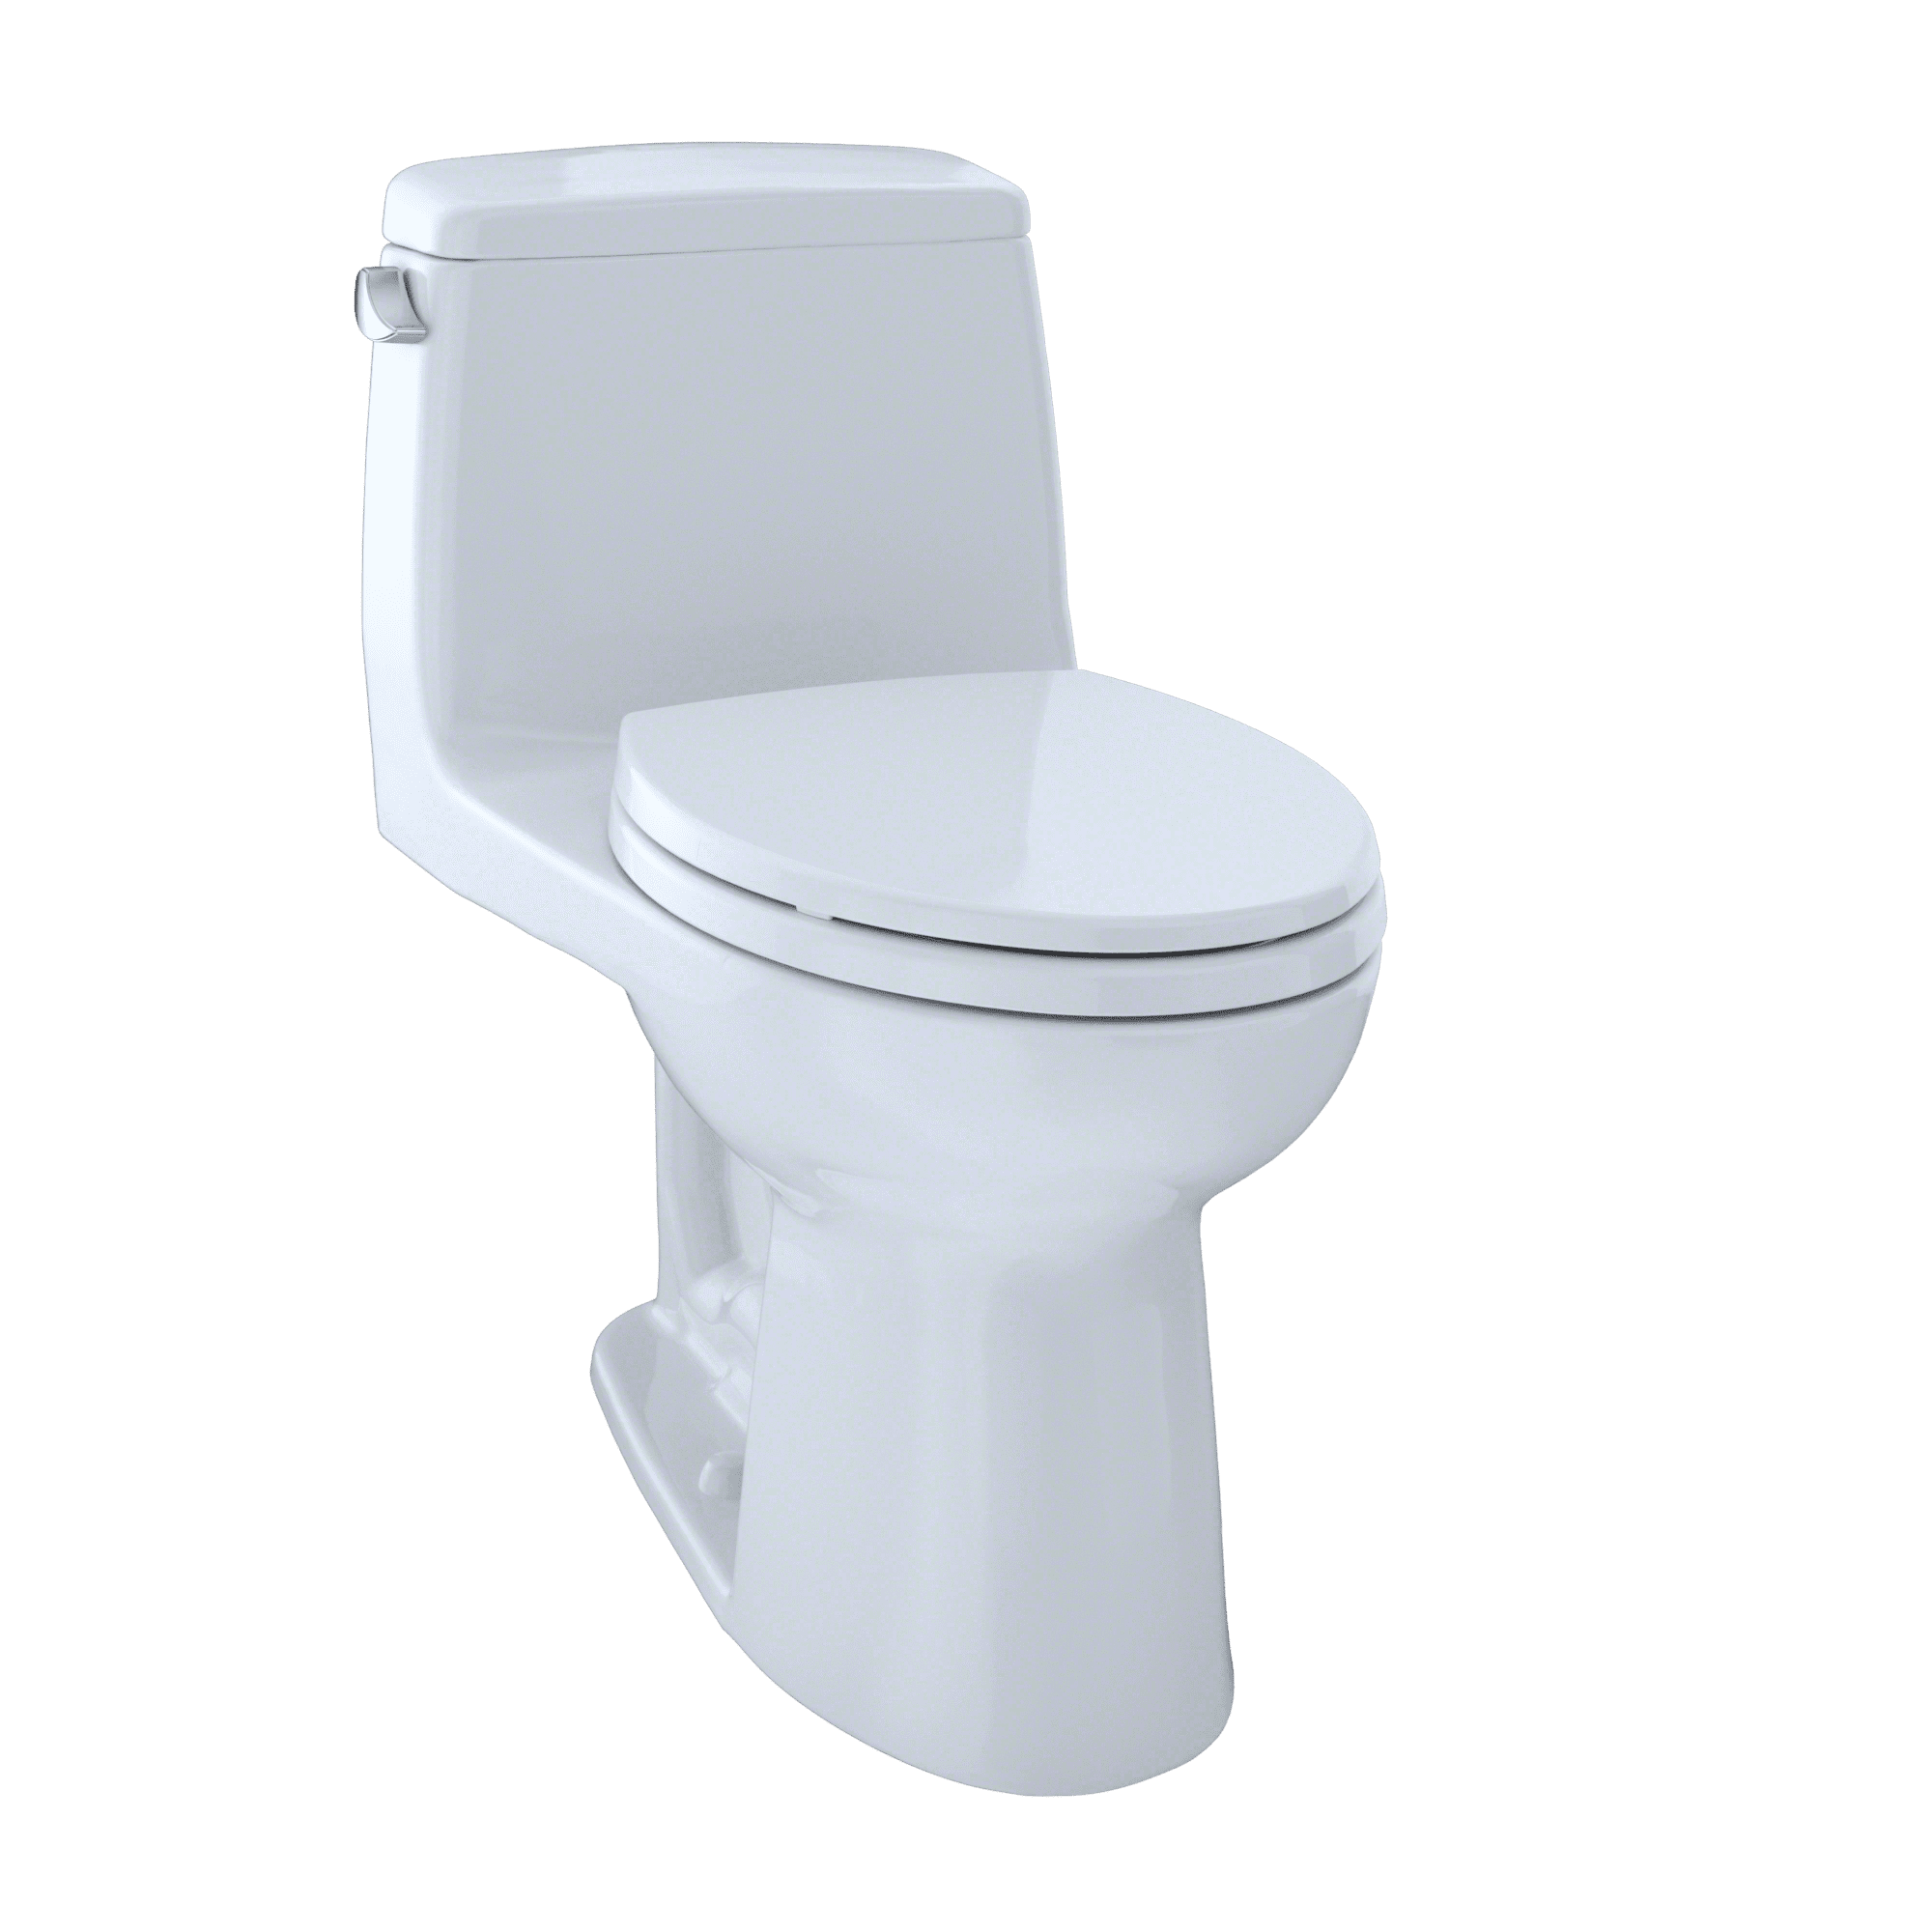 TOTO® Eco UltraMax® One-Piece Elongated 1.28 GPF ADA Compliant Toilet with  CEFIONTECT, Cotton White - MS854114ELG#01